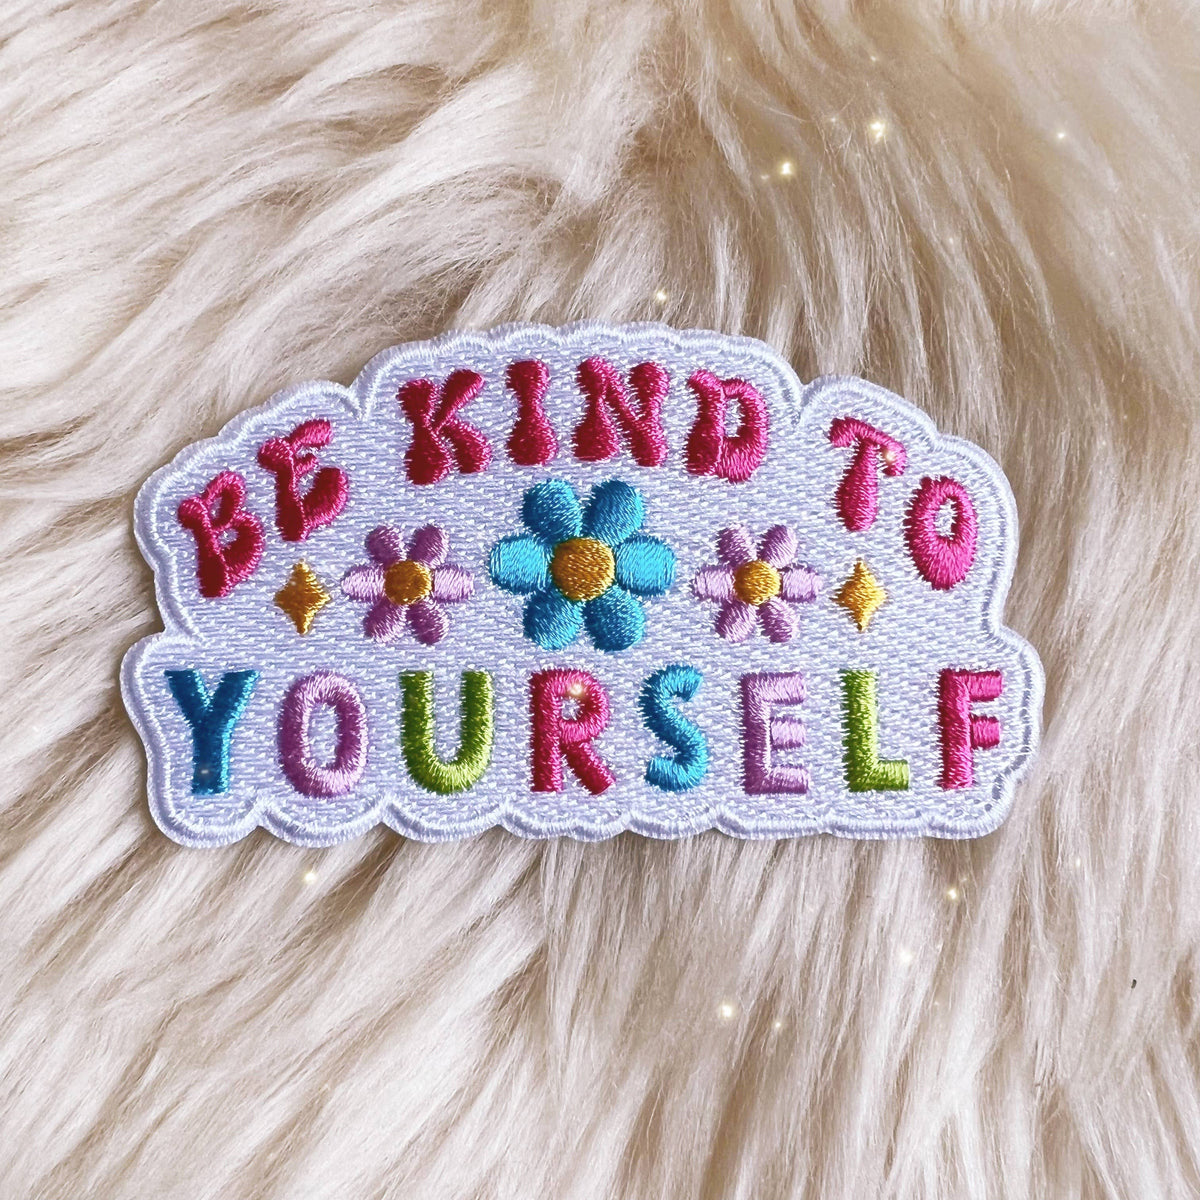 Positivity Quote Patches